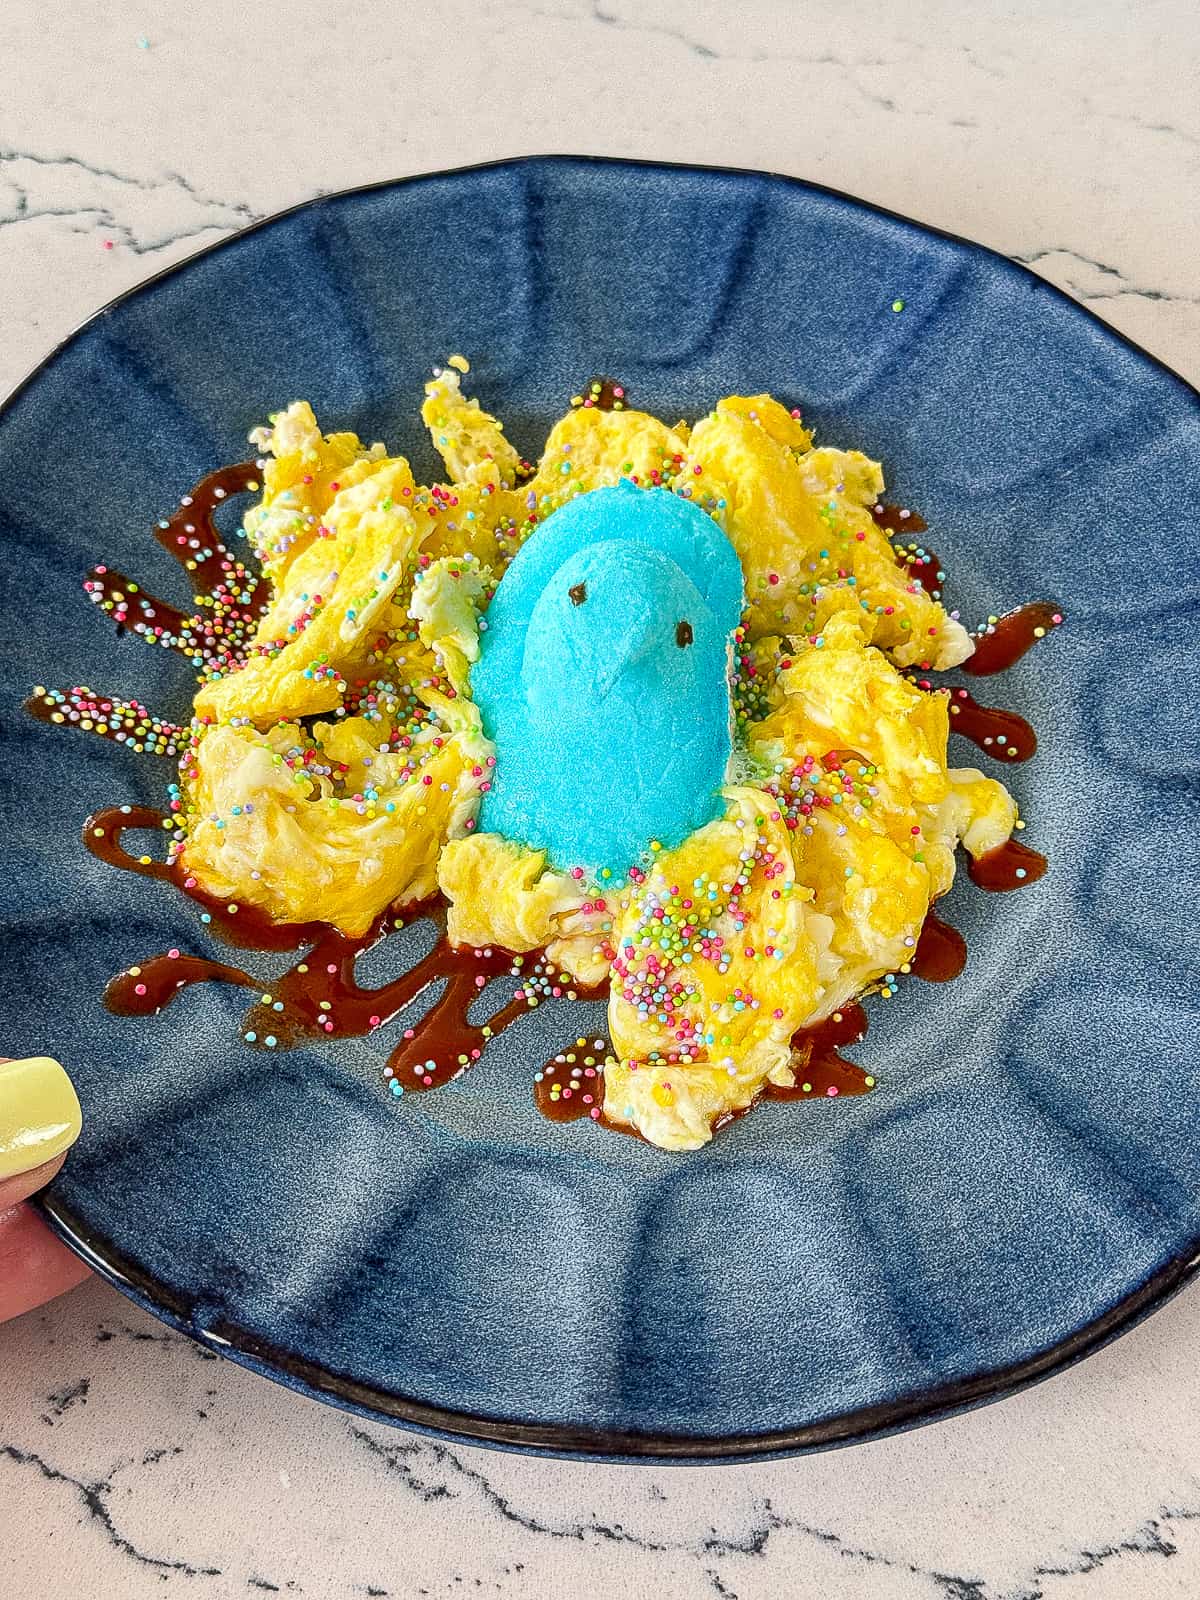 Breakfast recipe with scrambled eggs and peeps for Easter